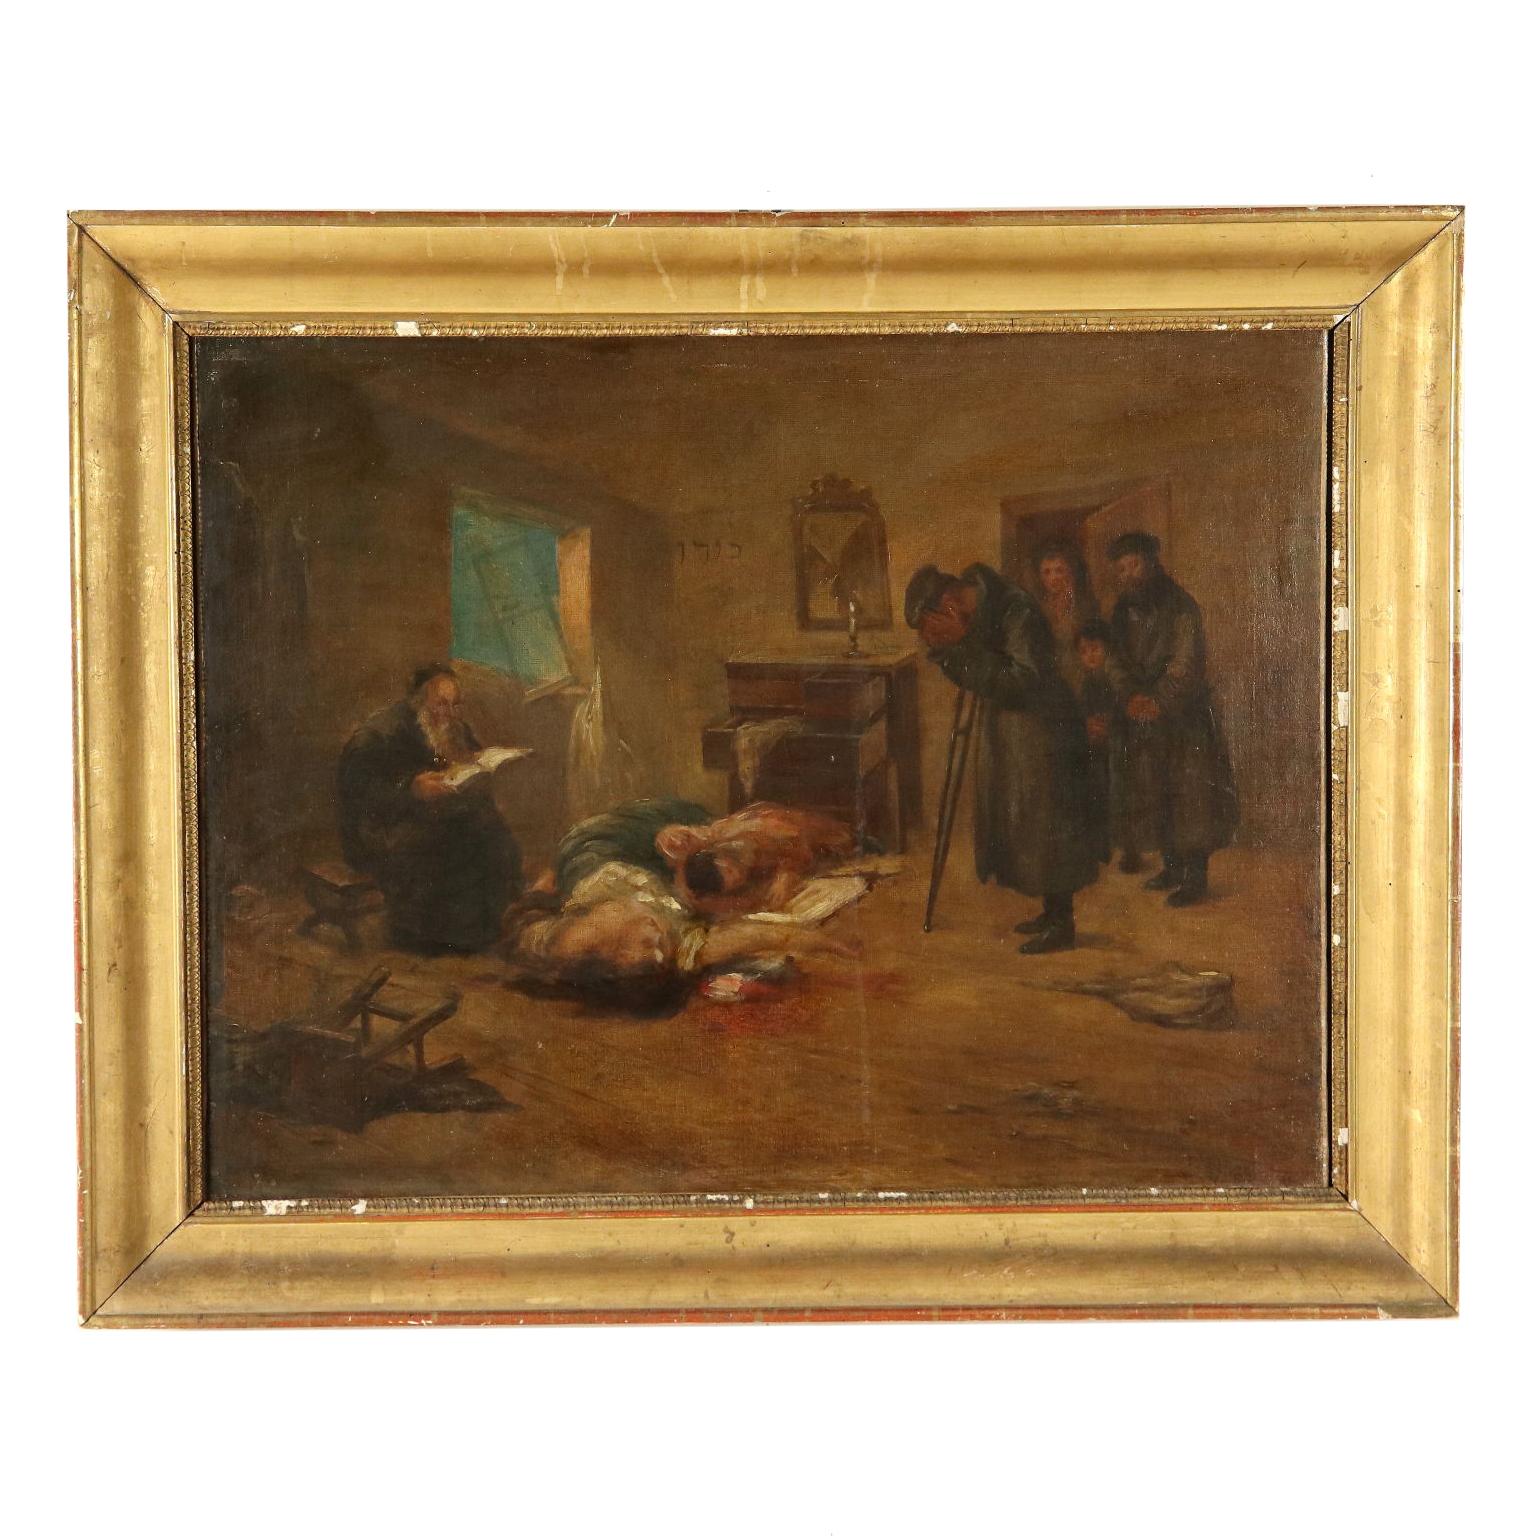 Unknown Figurative Painting - The Tragic Return Oil on Canvas Late 1800s